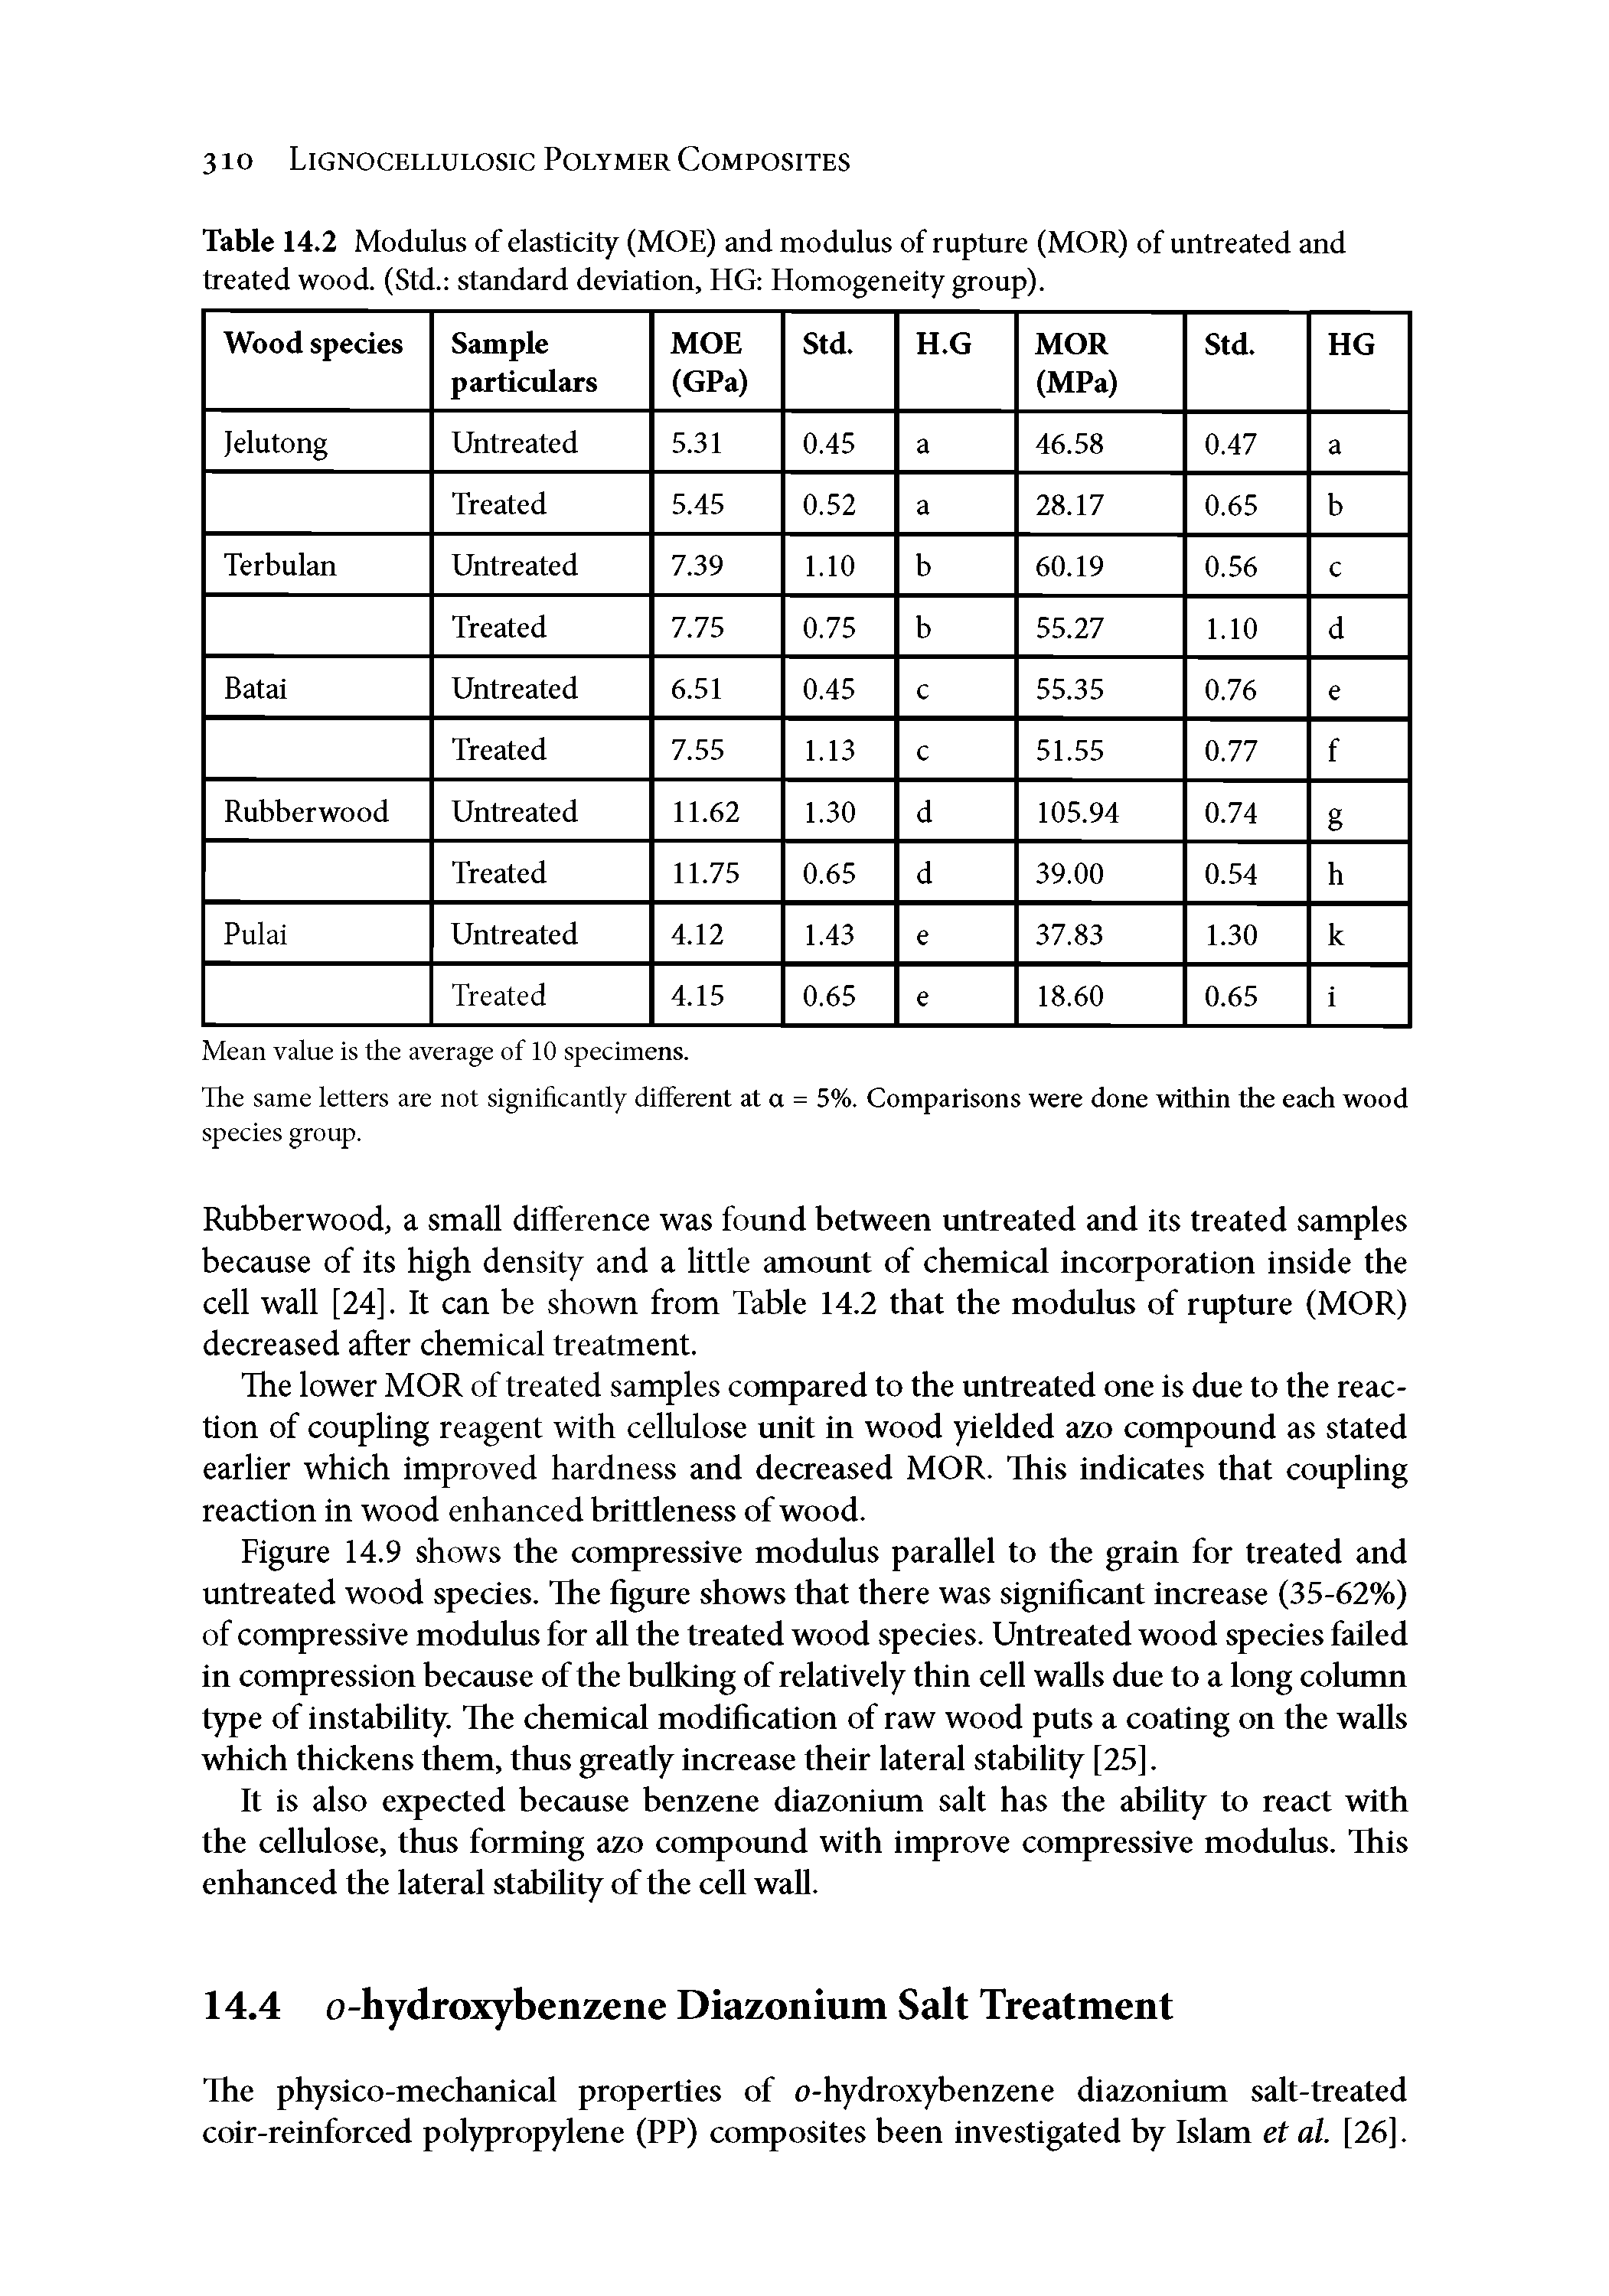 Table 14.2 Modulus of elasticity (MOE) and modulus of rupture (MOR) of untreated and treated wood. (Std. standard deviation, HG Homogeneity group).